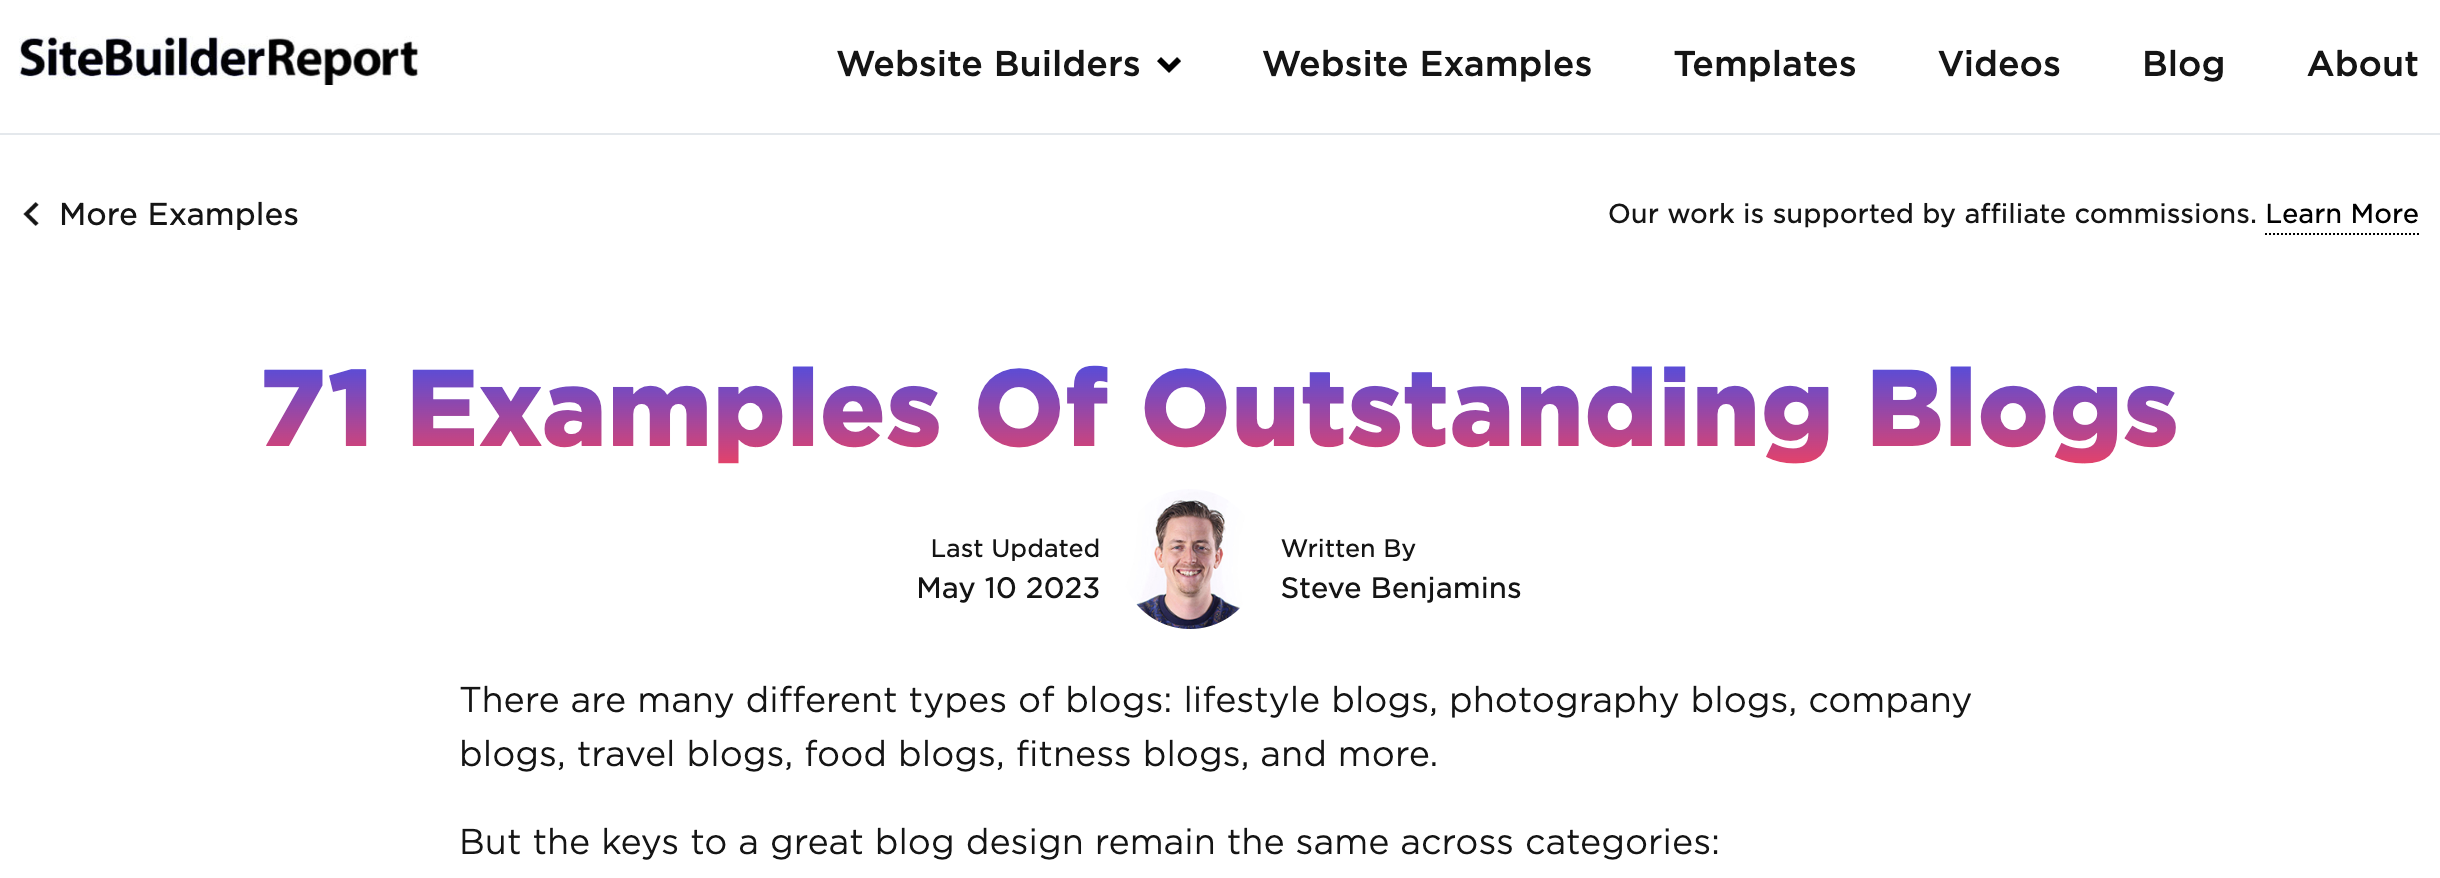 site builder report about 71 examples of blog posts